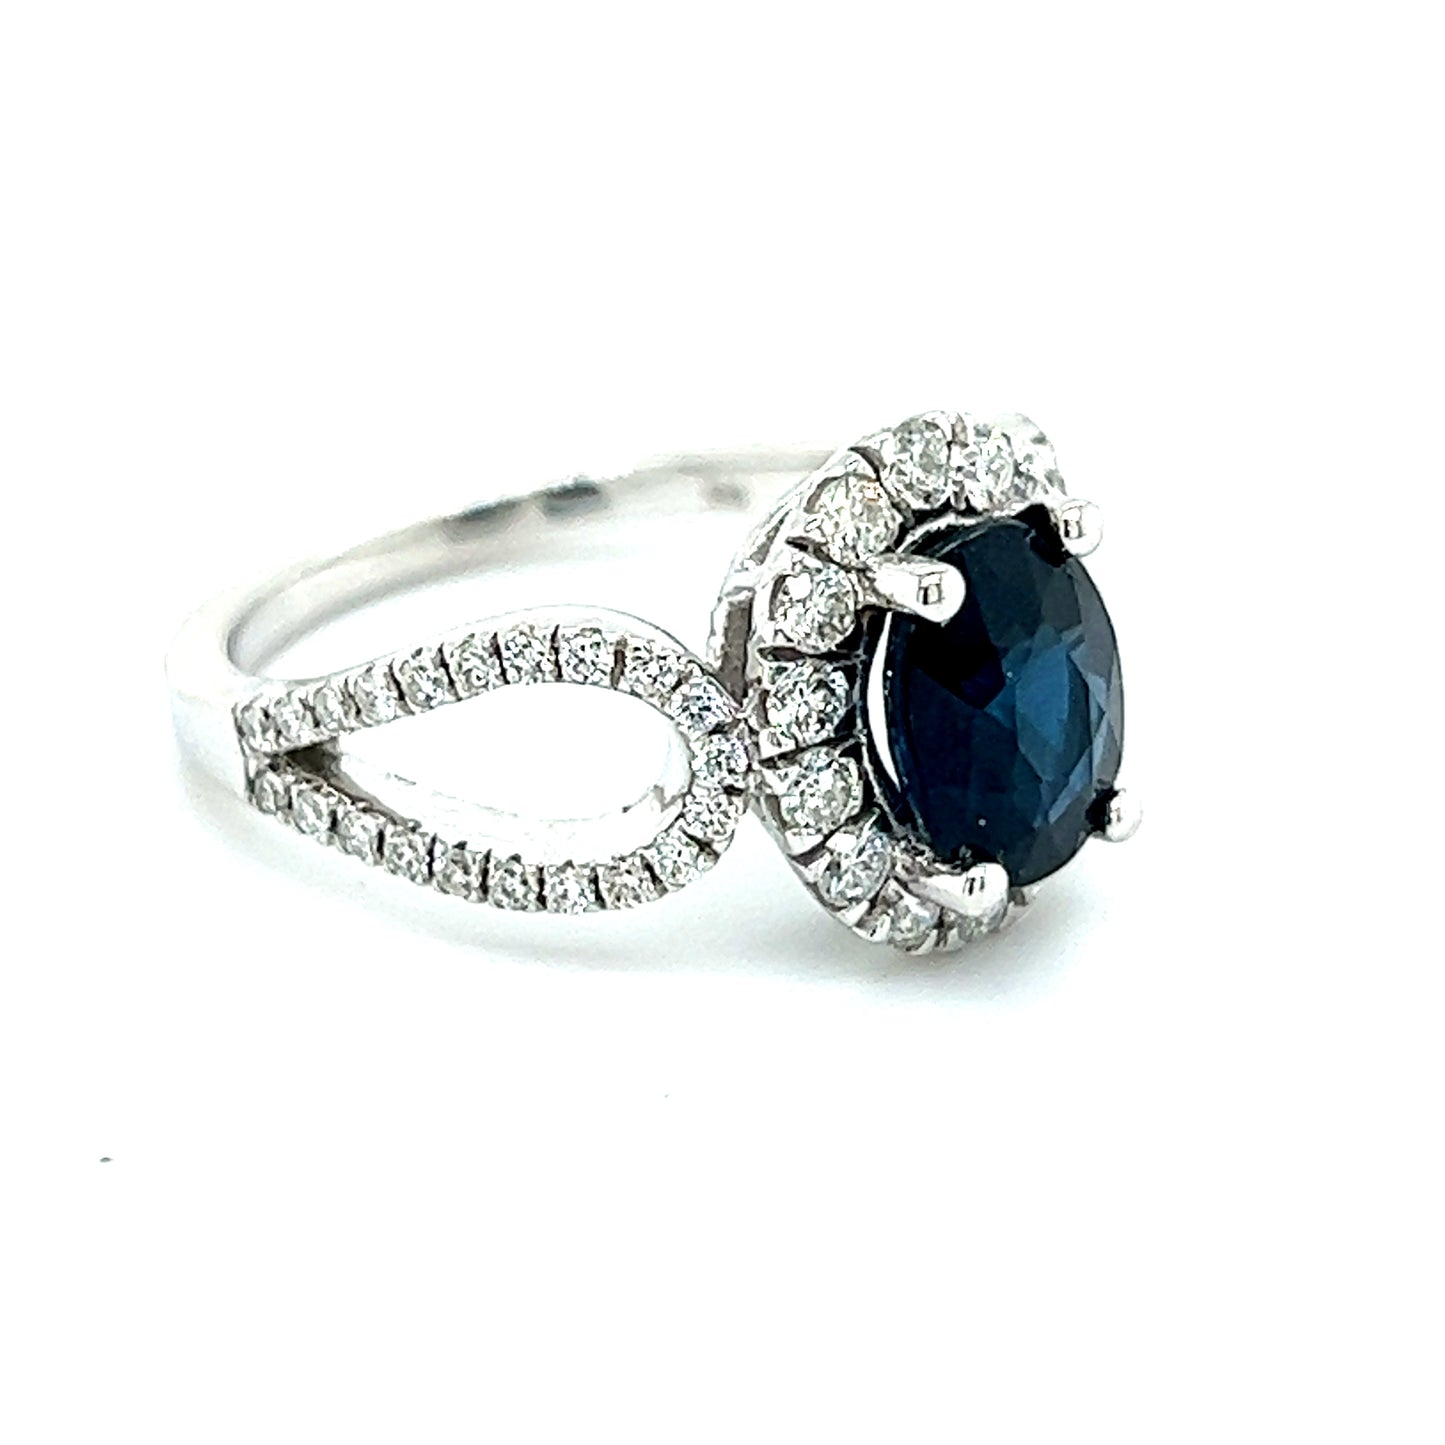 Natural Sapphire Diamond Ring Size 6.25 14k W Gold 2.93 TCW Certified $5,950 216682